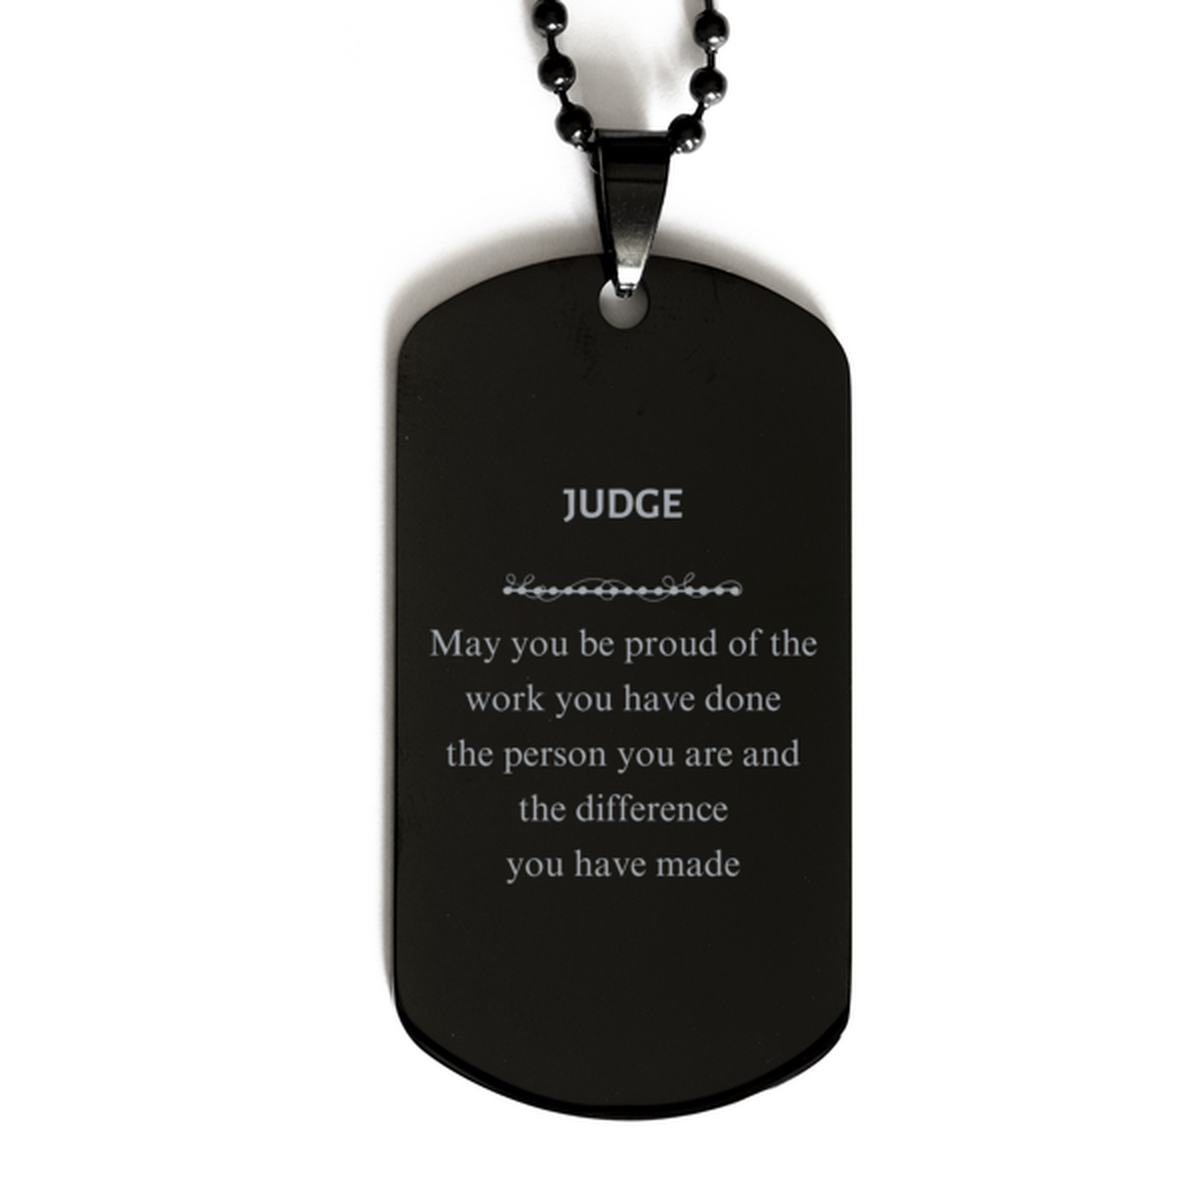 Judge May you be proud of the work you have done, Retirement Judge Black Dog Tag for Colleague Appreciation Gifts Amazing for Judge